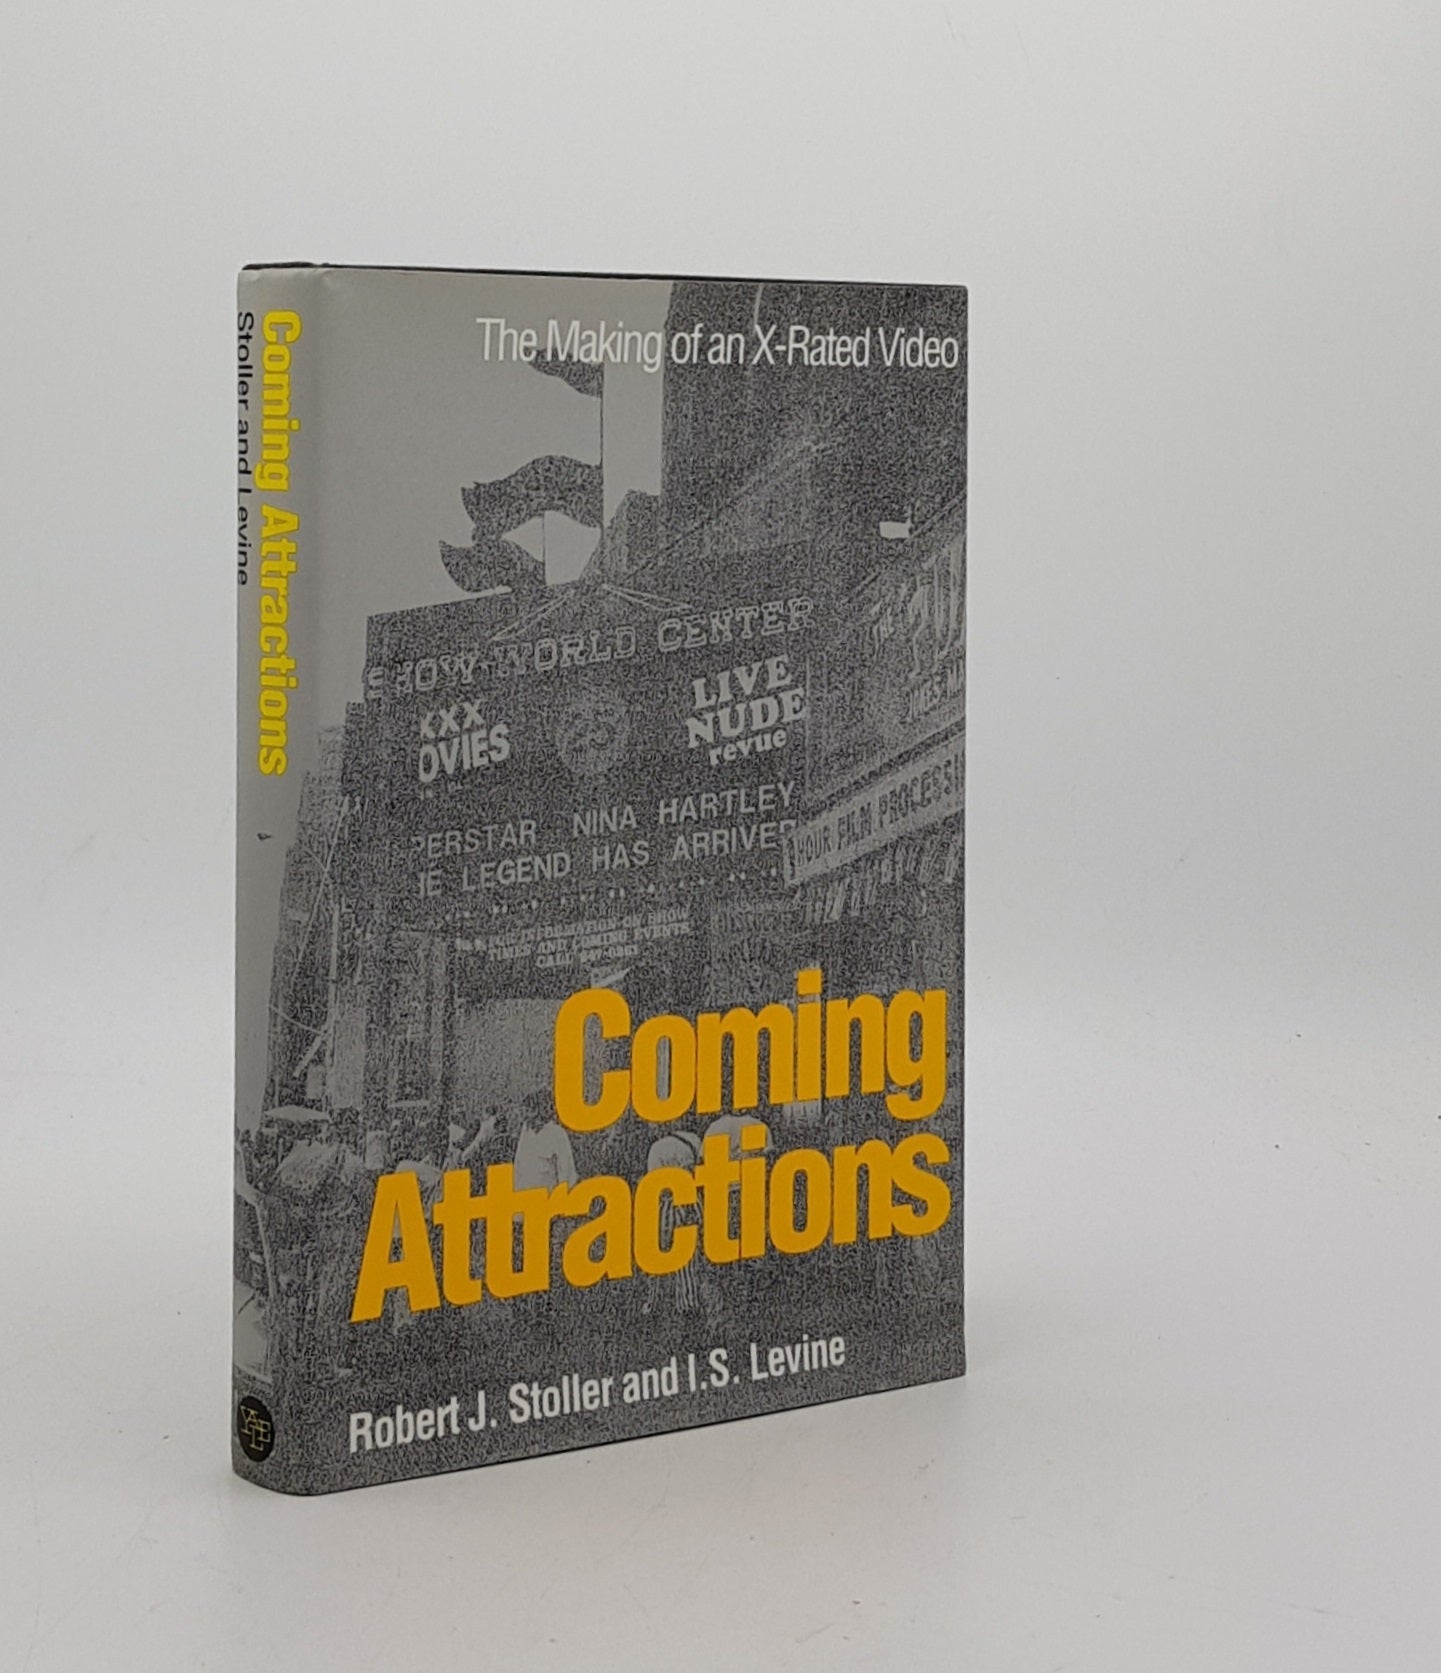 STOLLER Robert J., LEVINE I.S. - Coming Attractions the Making of an X-Rated Video